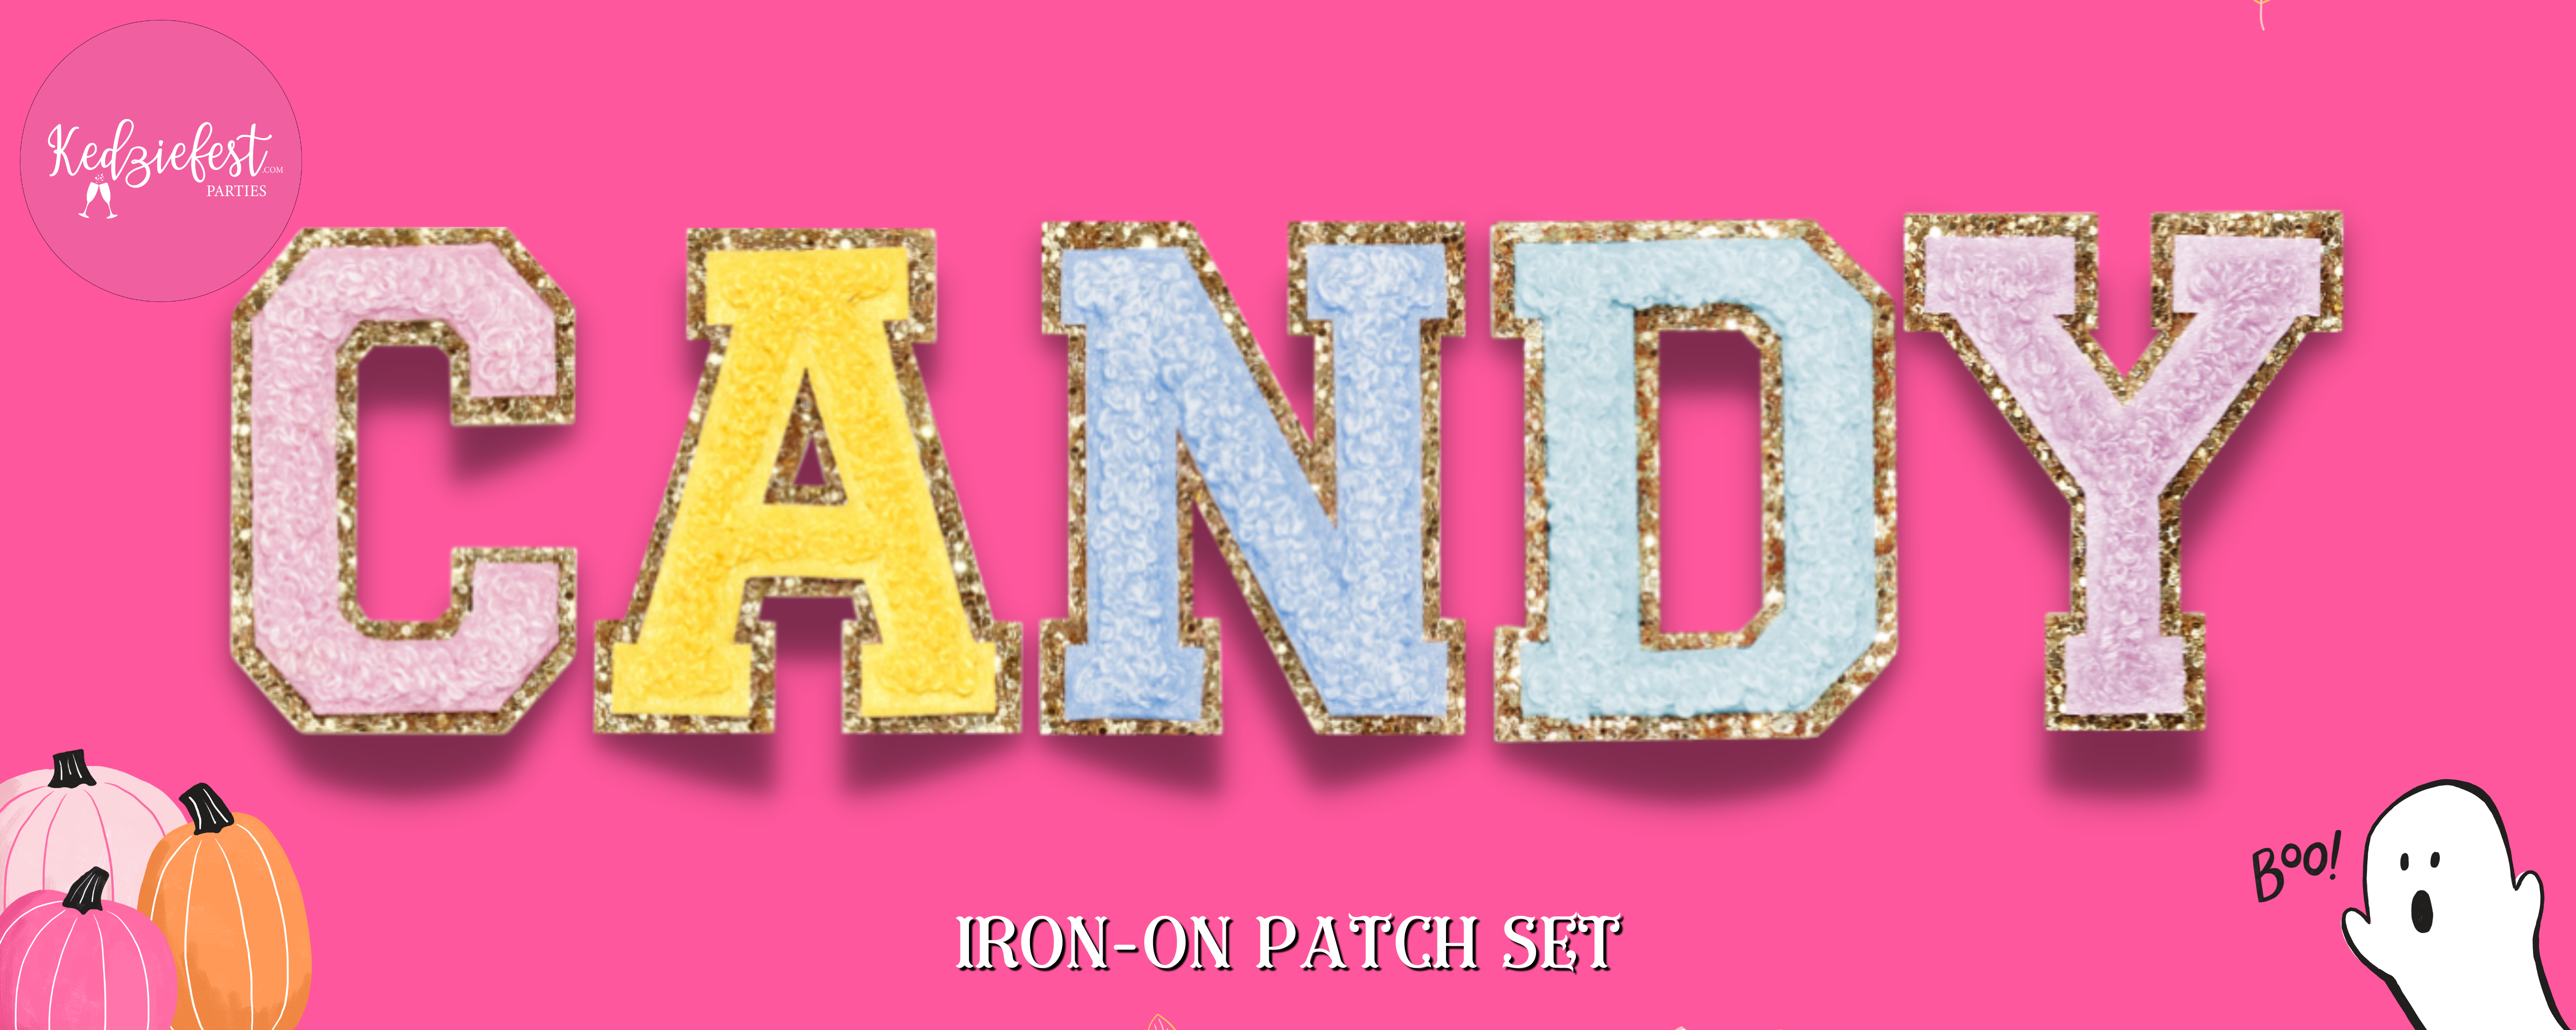 Candy Iron-On Patch Set by Kedziefest Parties